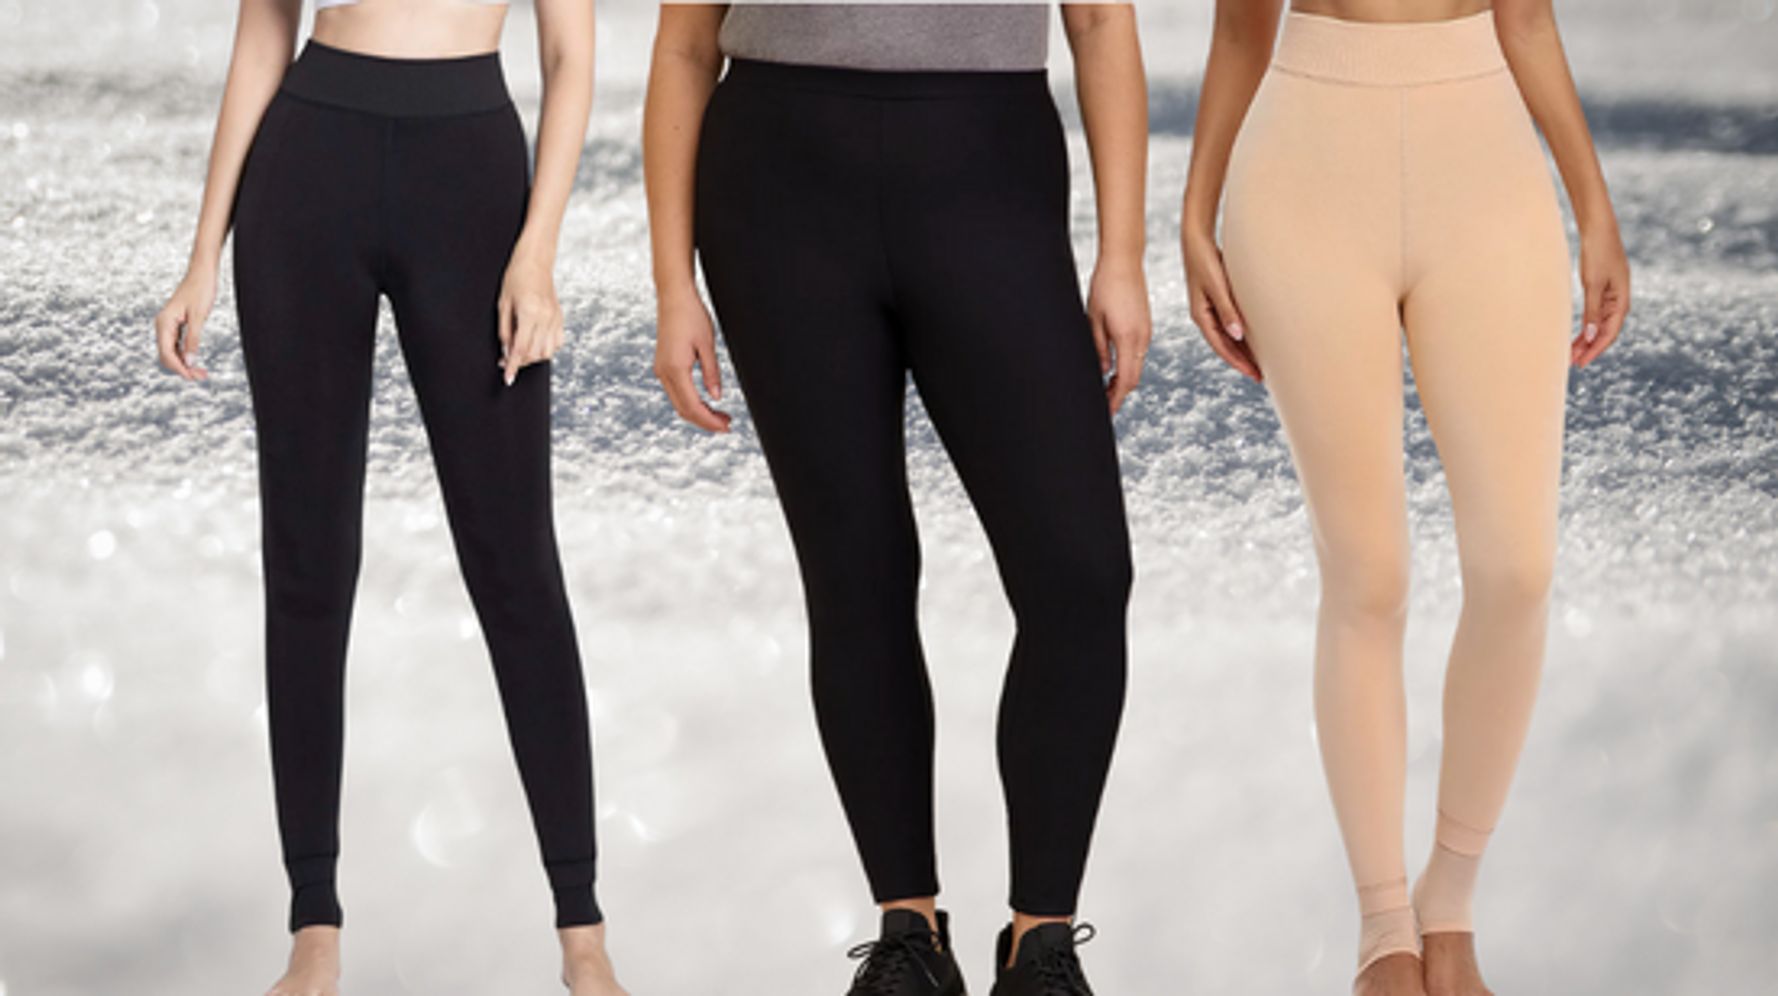 These Best-Selling Fleece Leggings Are Extra Warm (and Make Your